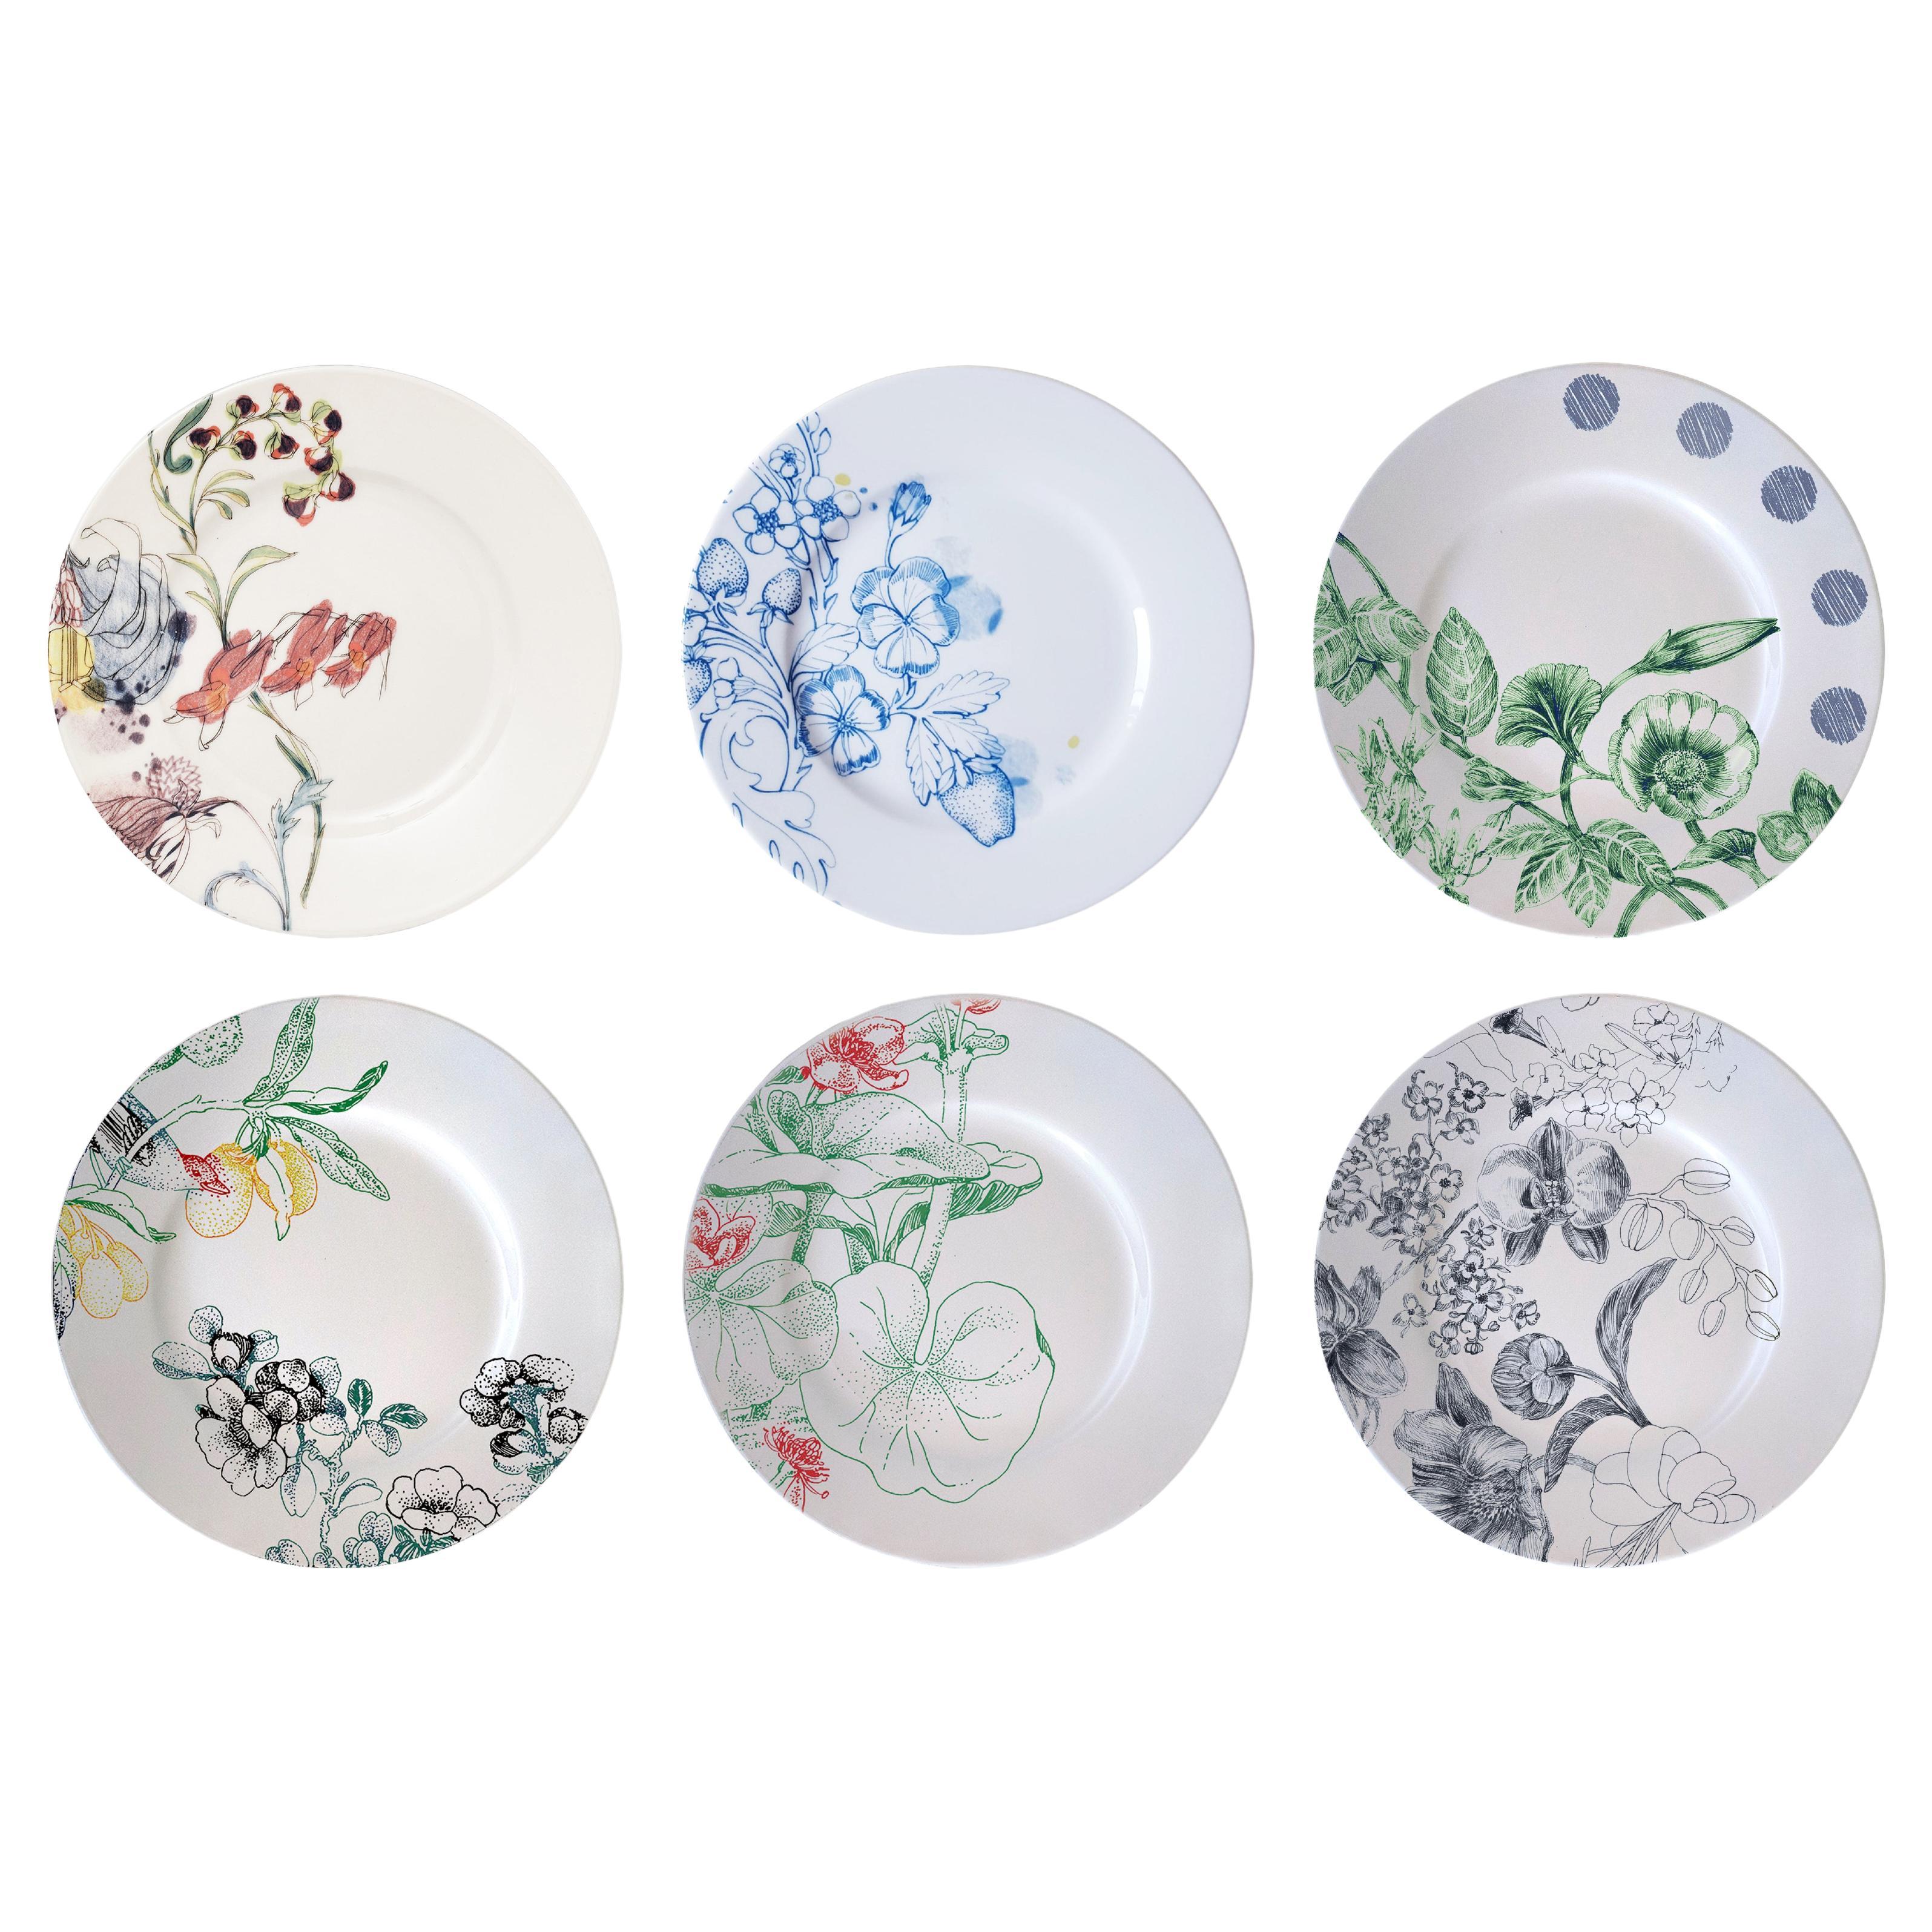 Mix & Match, Six Contemporary Porcelain Dessert Plates with Multicolored Flowers